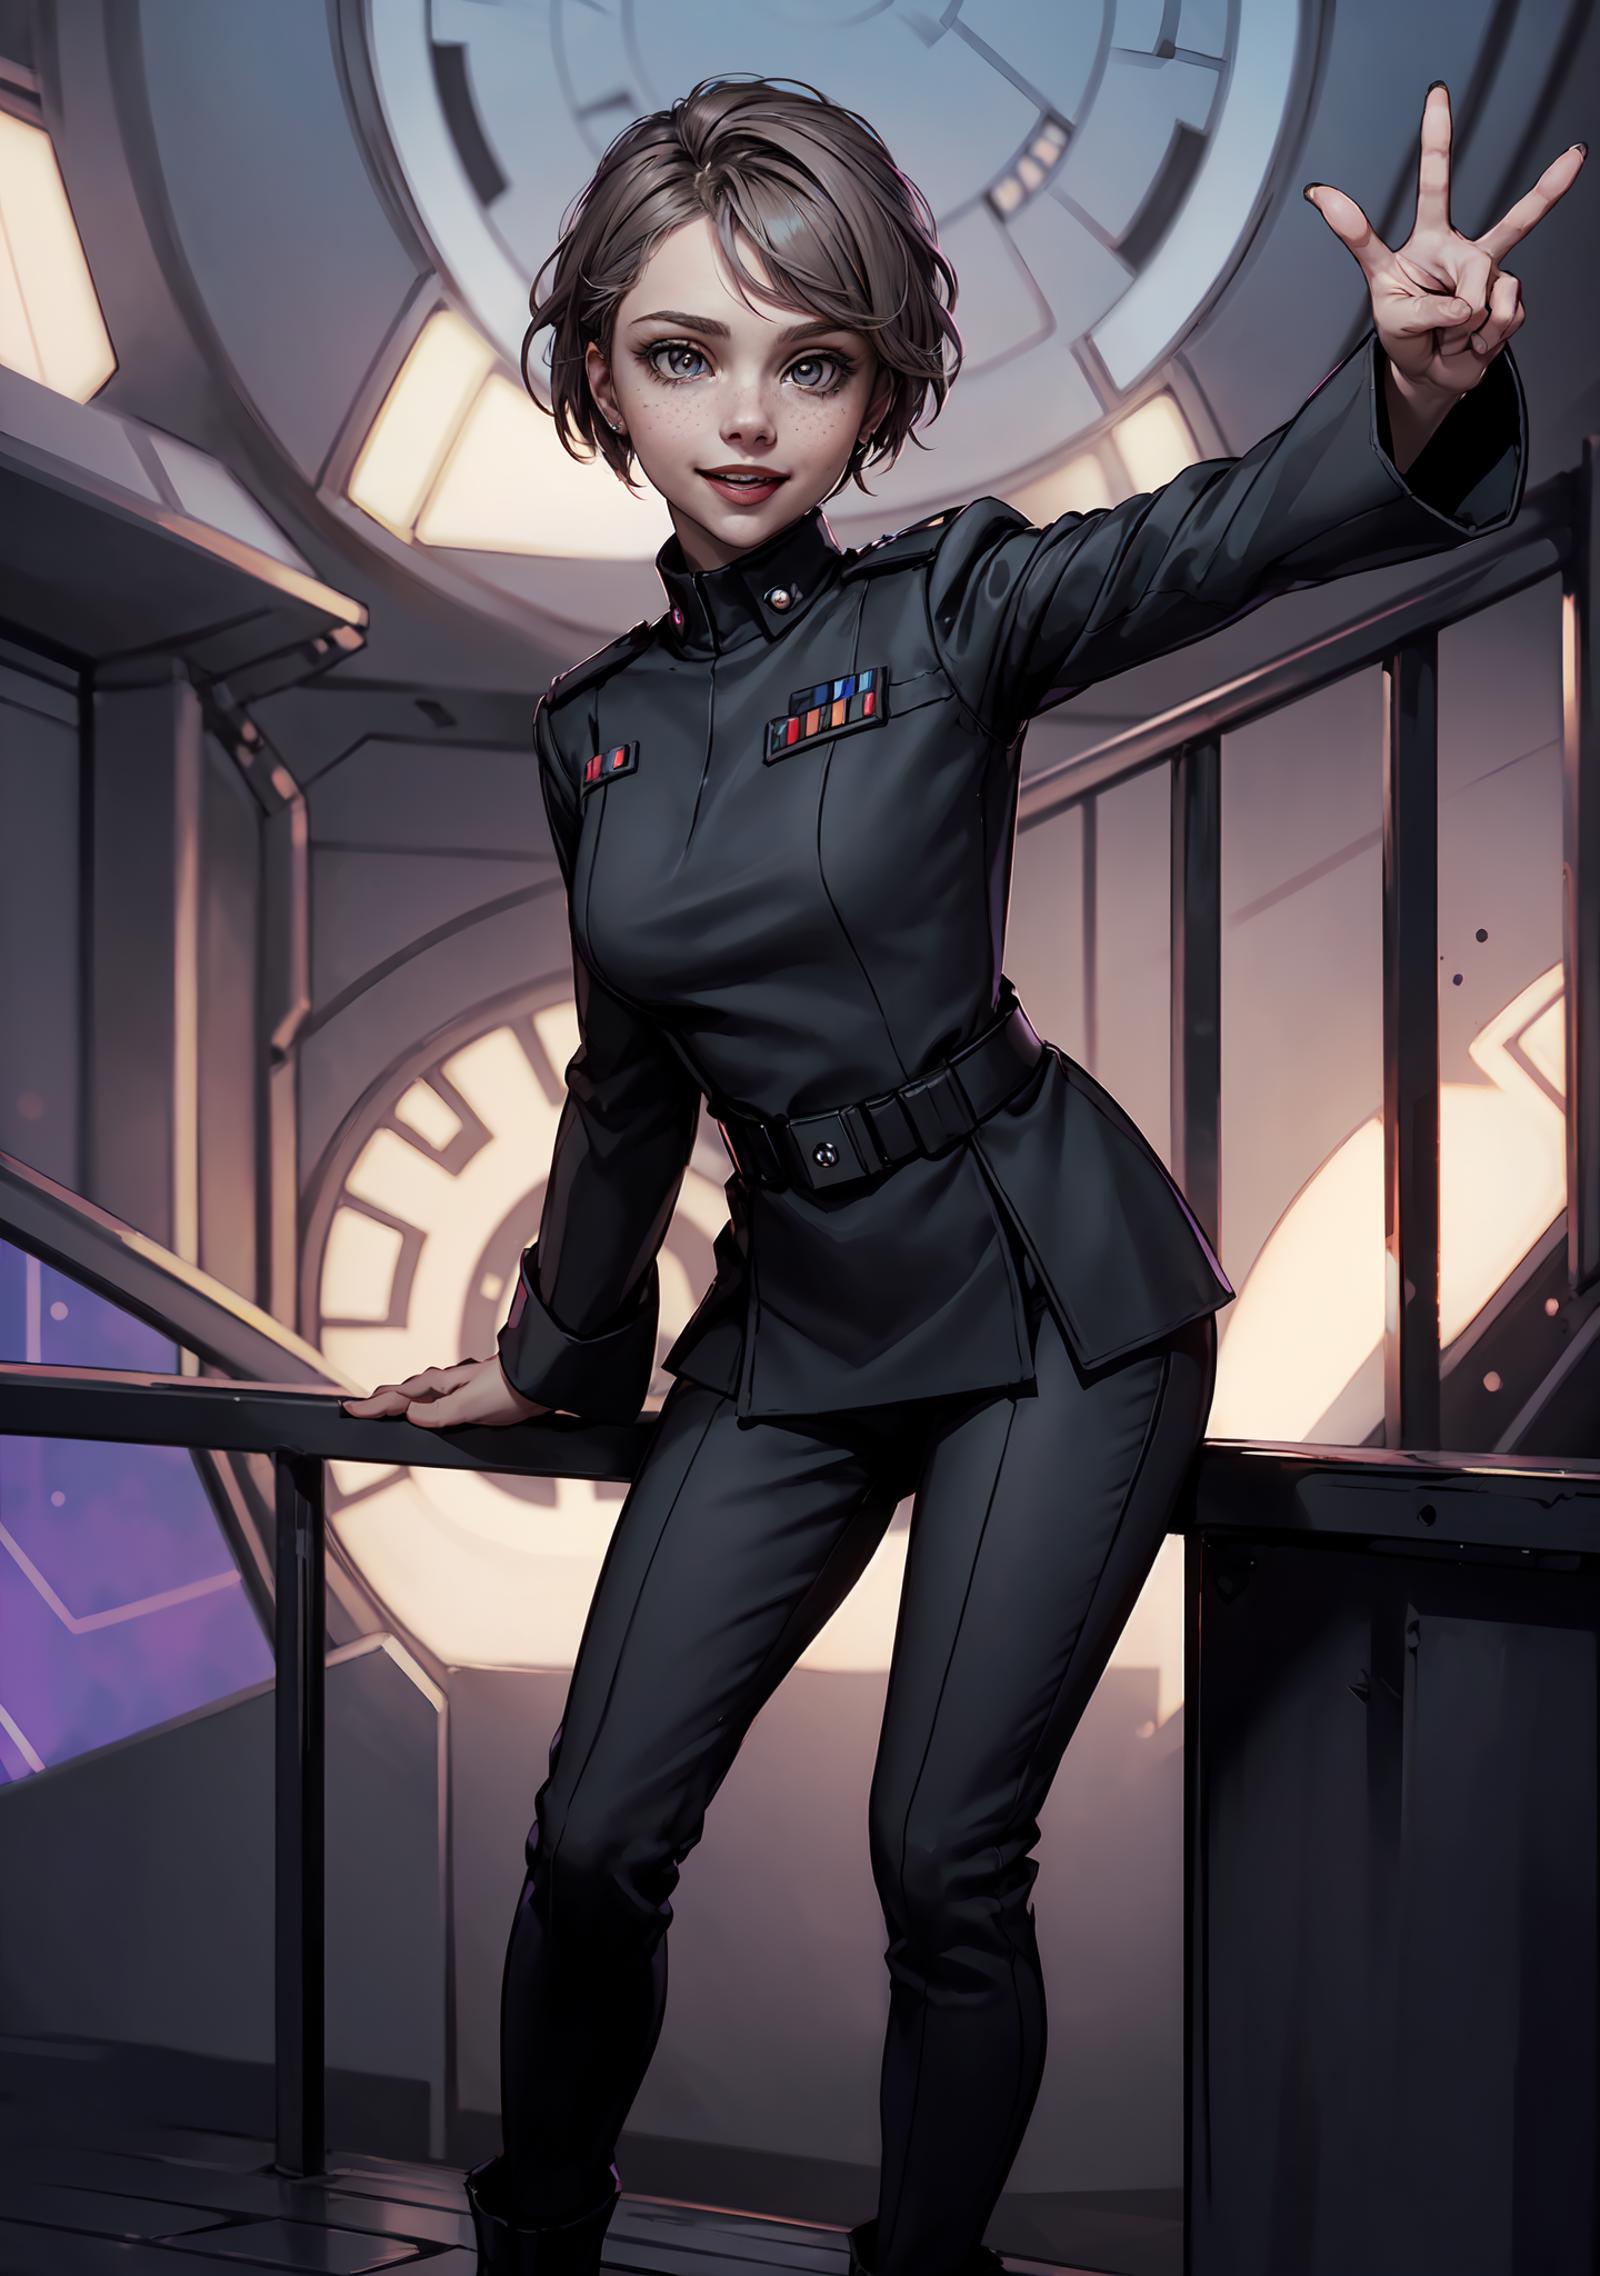 Star Wars imperial officer uniform image by Crow_Mauler